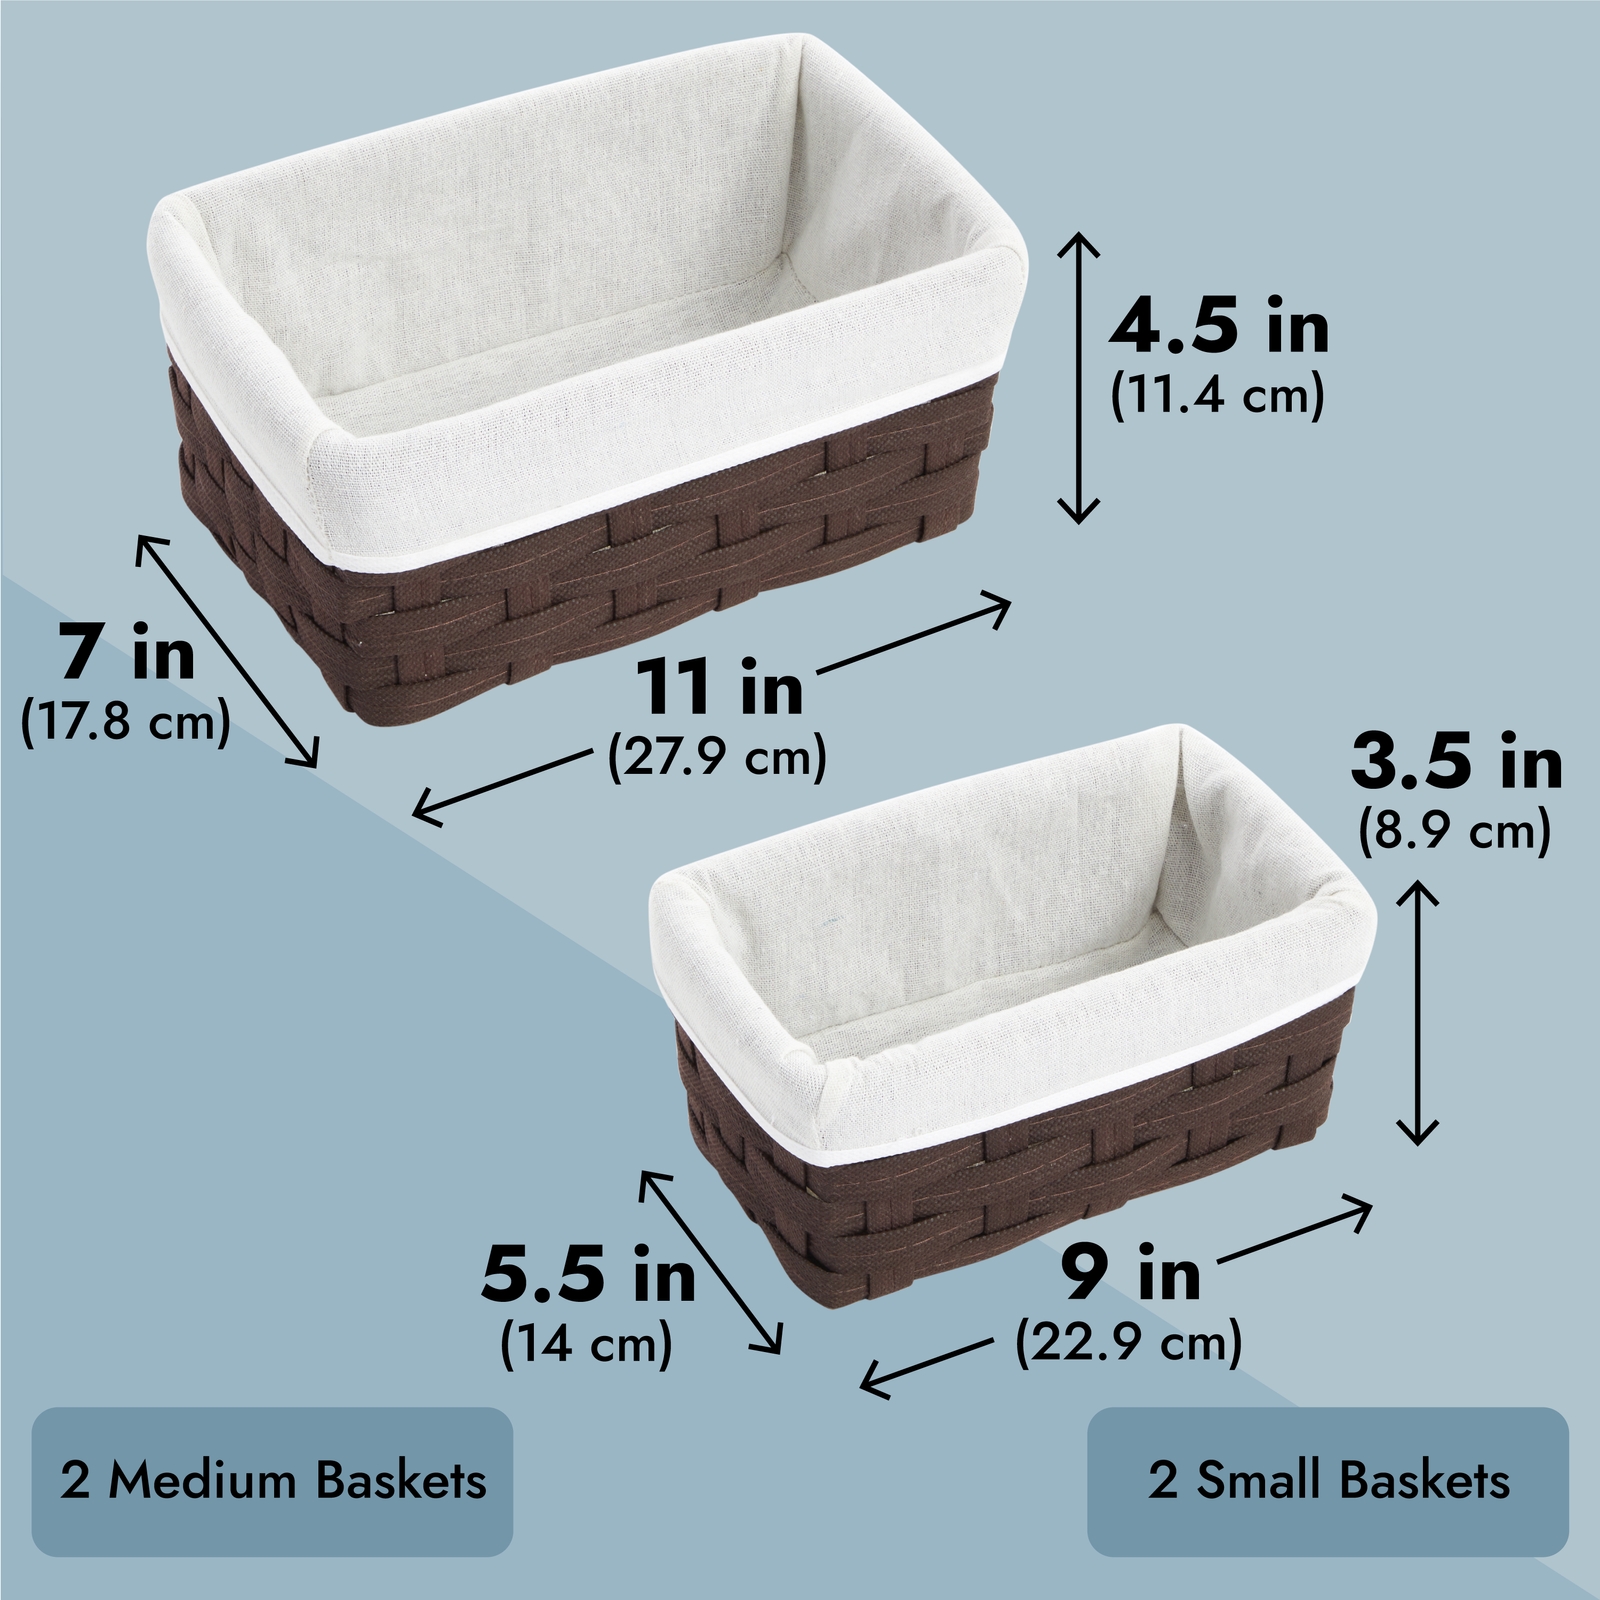 5 Pack Wicker Nesting Baskets with Cloth Lining for Pantry Shelves, Rectangular Storage Bins for Organizing Closet (Brown, 3 Sizes) - image 5 of 10